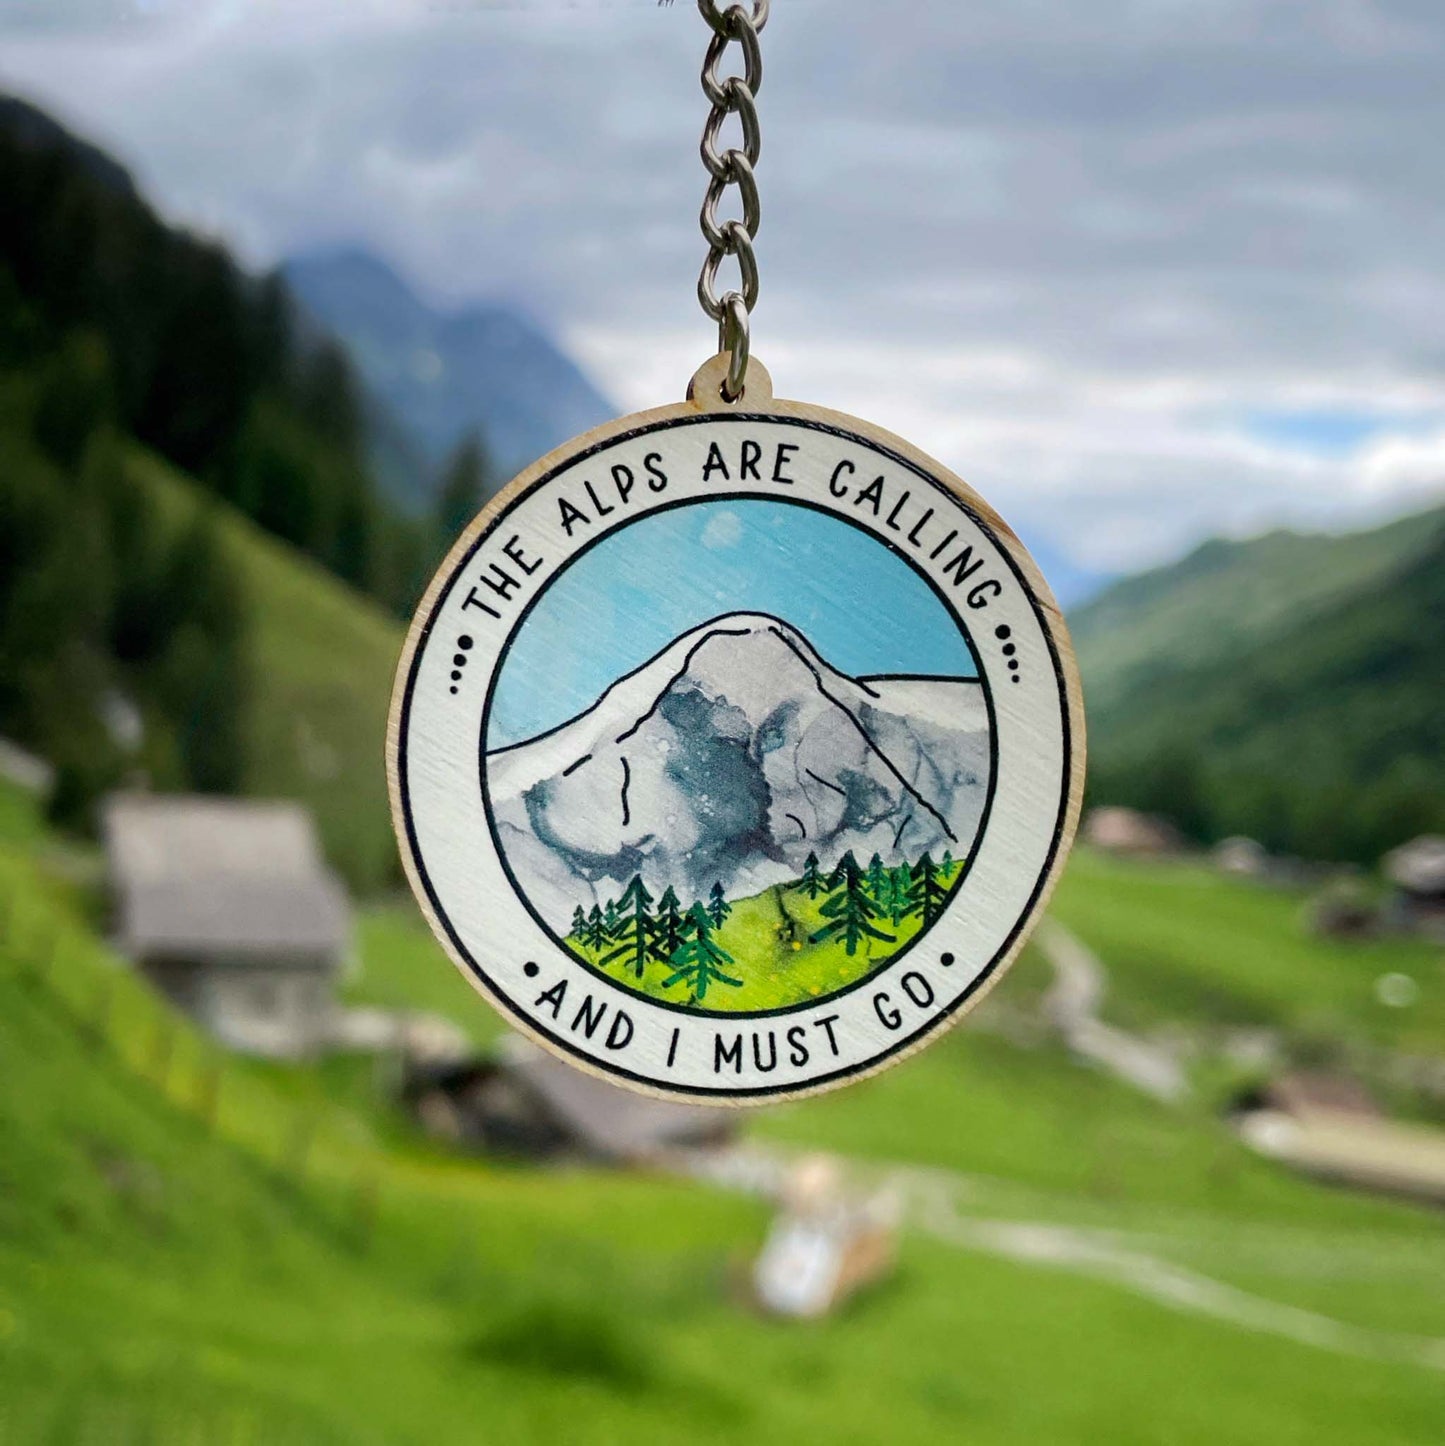 The Alps are calling Key-Chain